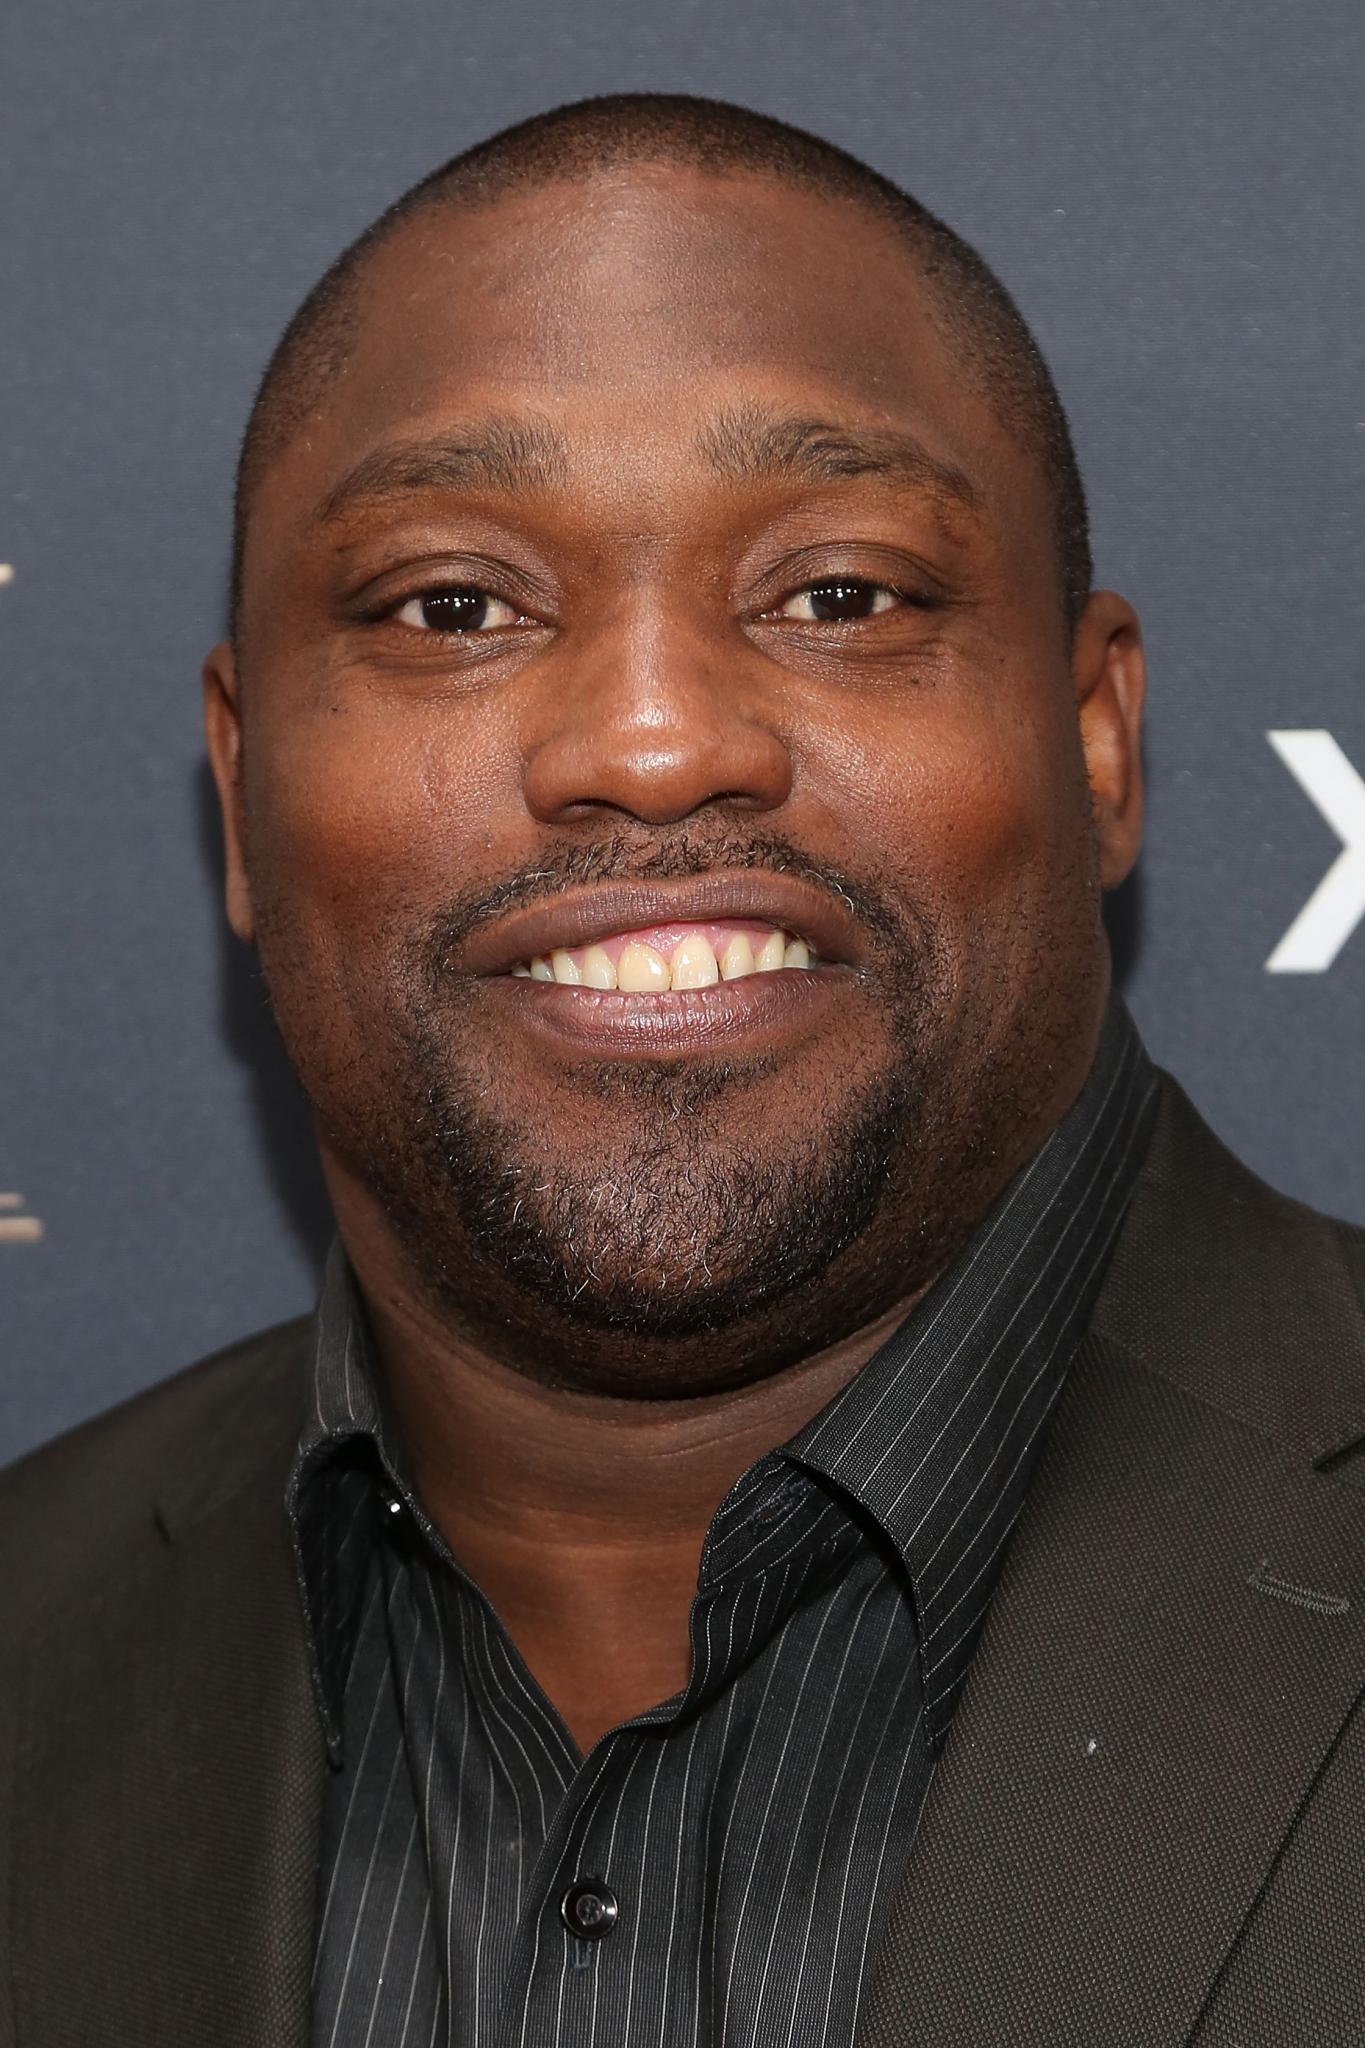 Warren Sapp Arrested on Charges of Assault, Soliciting Prostitution